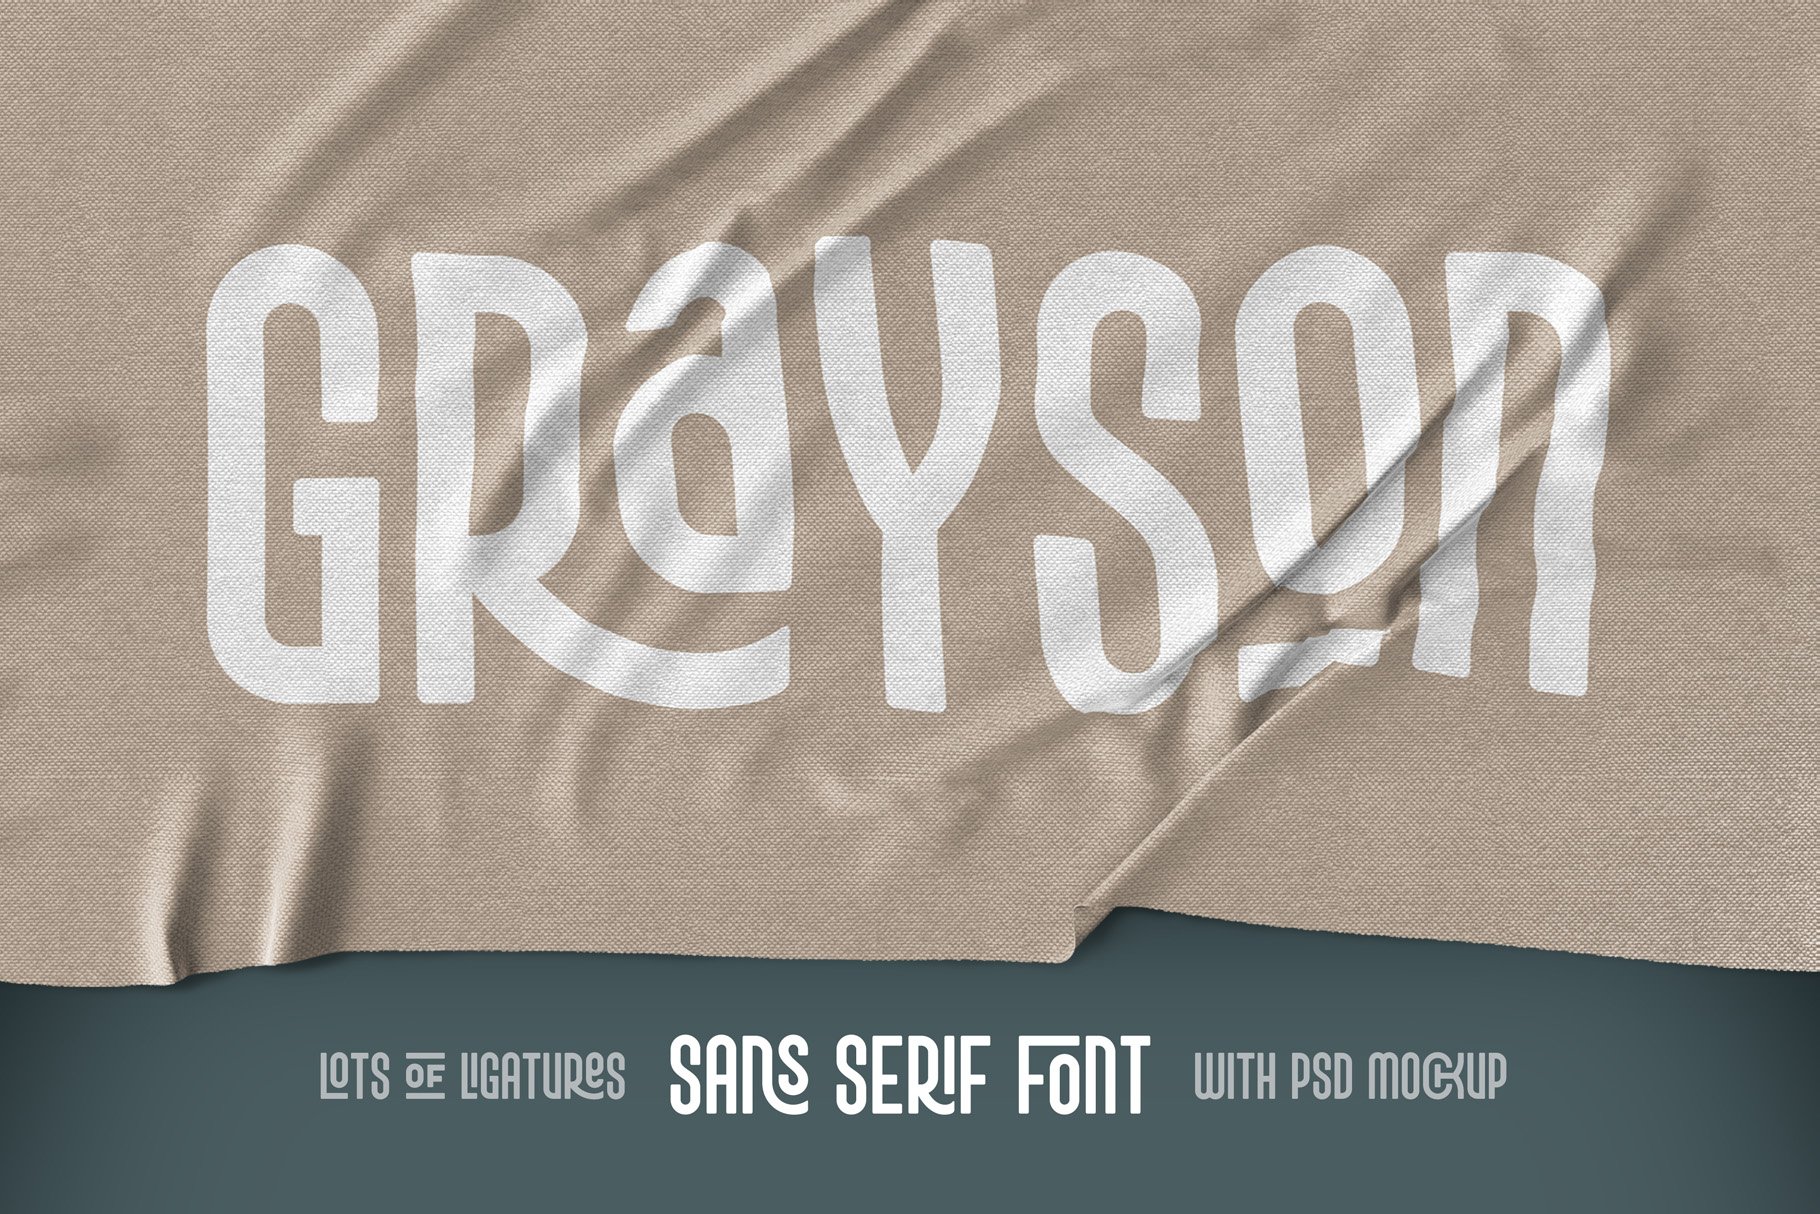 Grayson Font Pack. 55% OFF! preview image.